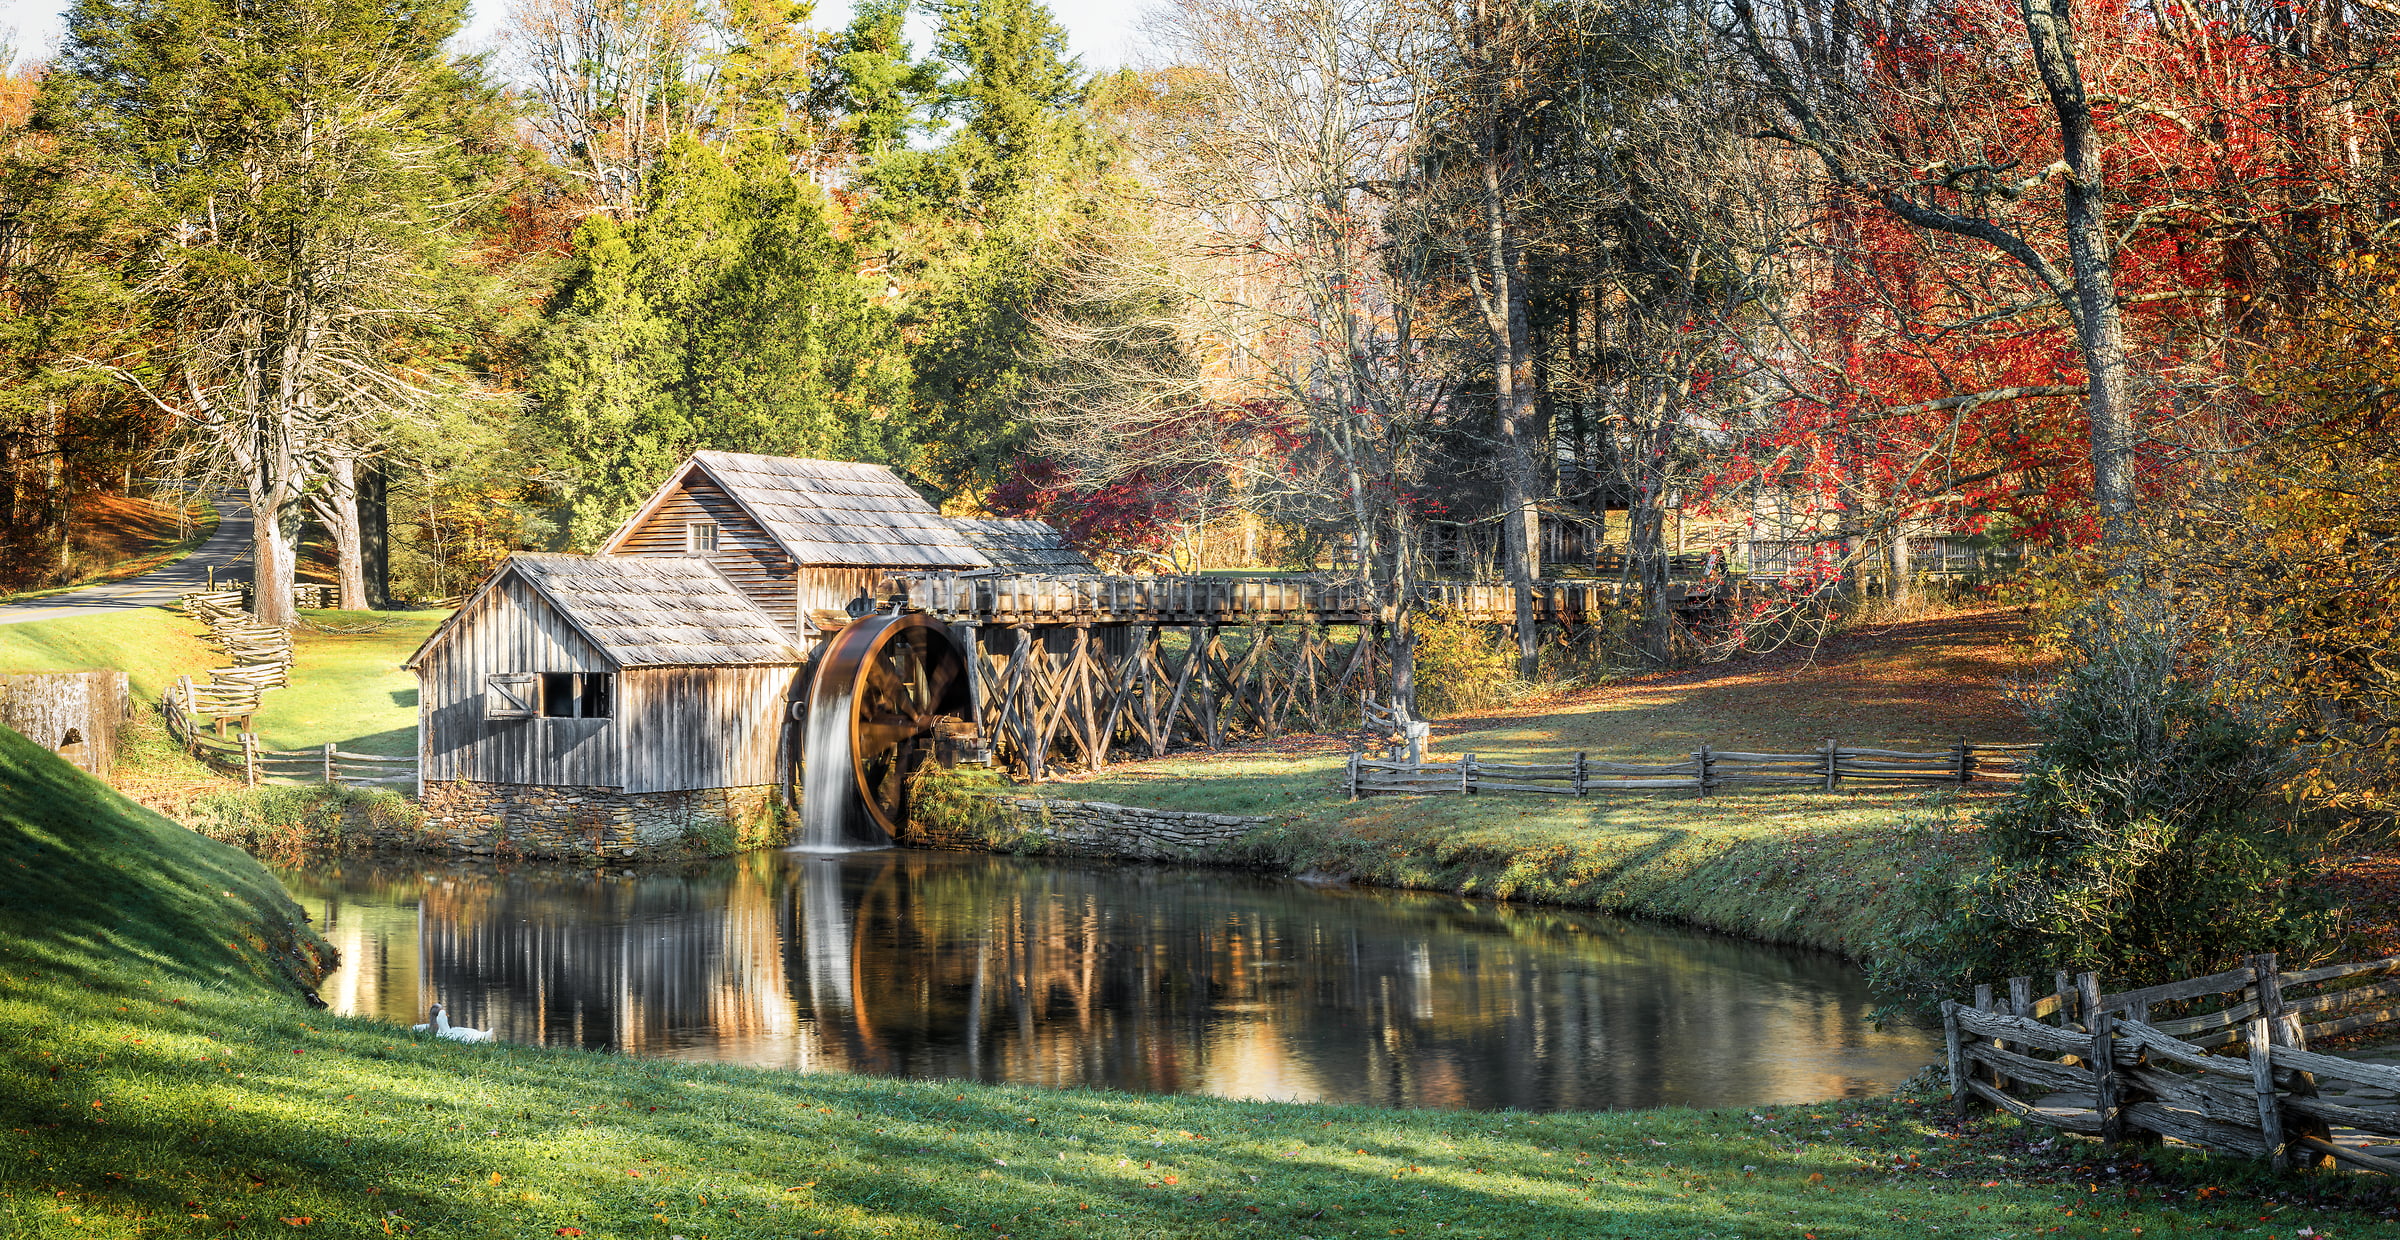 138 megapixels! A very high resolution, large-format VAST photo of a quaint old mill and a waterwheel; fine art photograph created by Jim Tarpo at Milepost 176 of the Blue Ridge Pkwy, Virginia